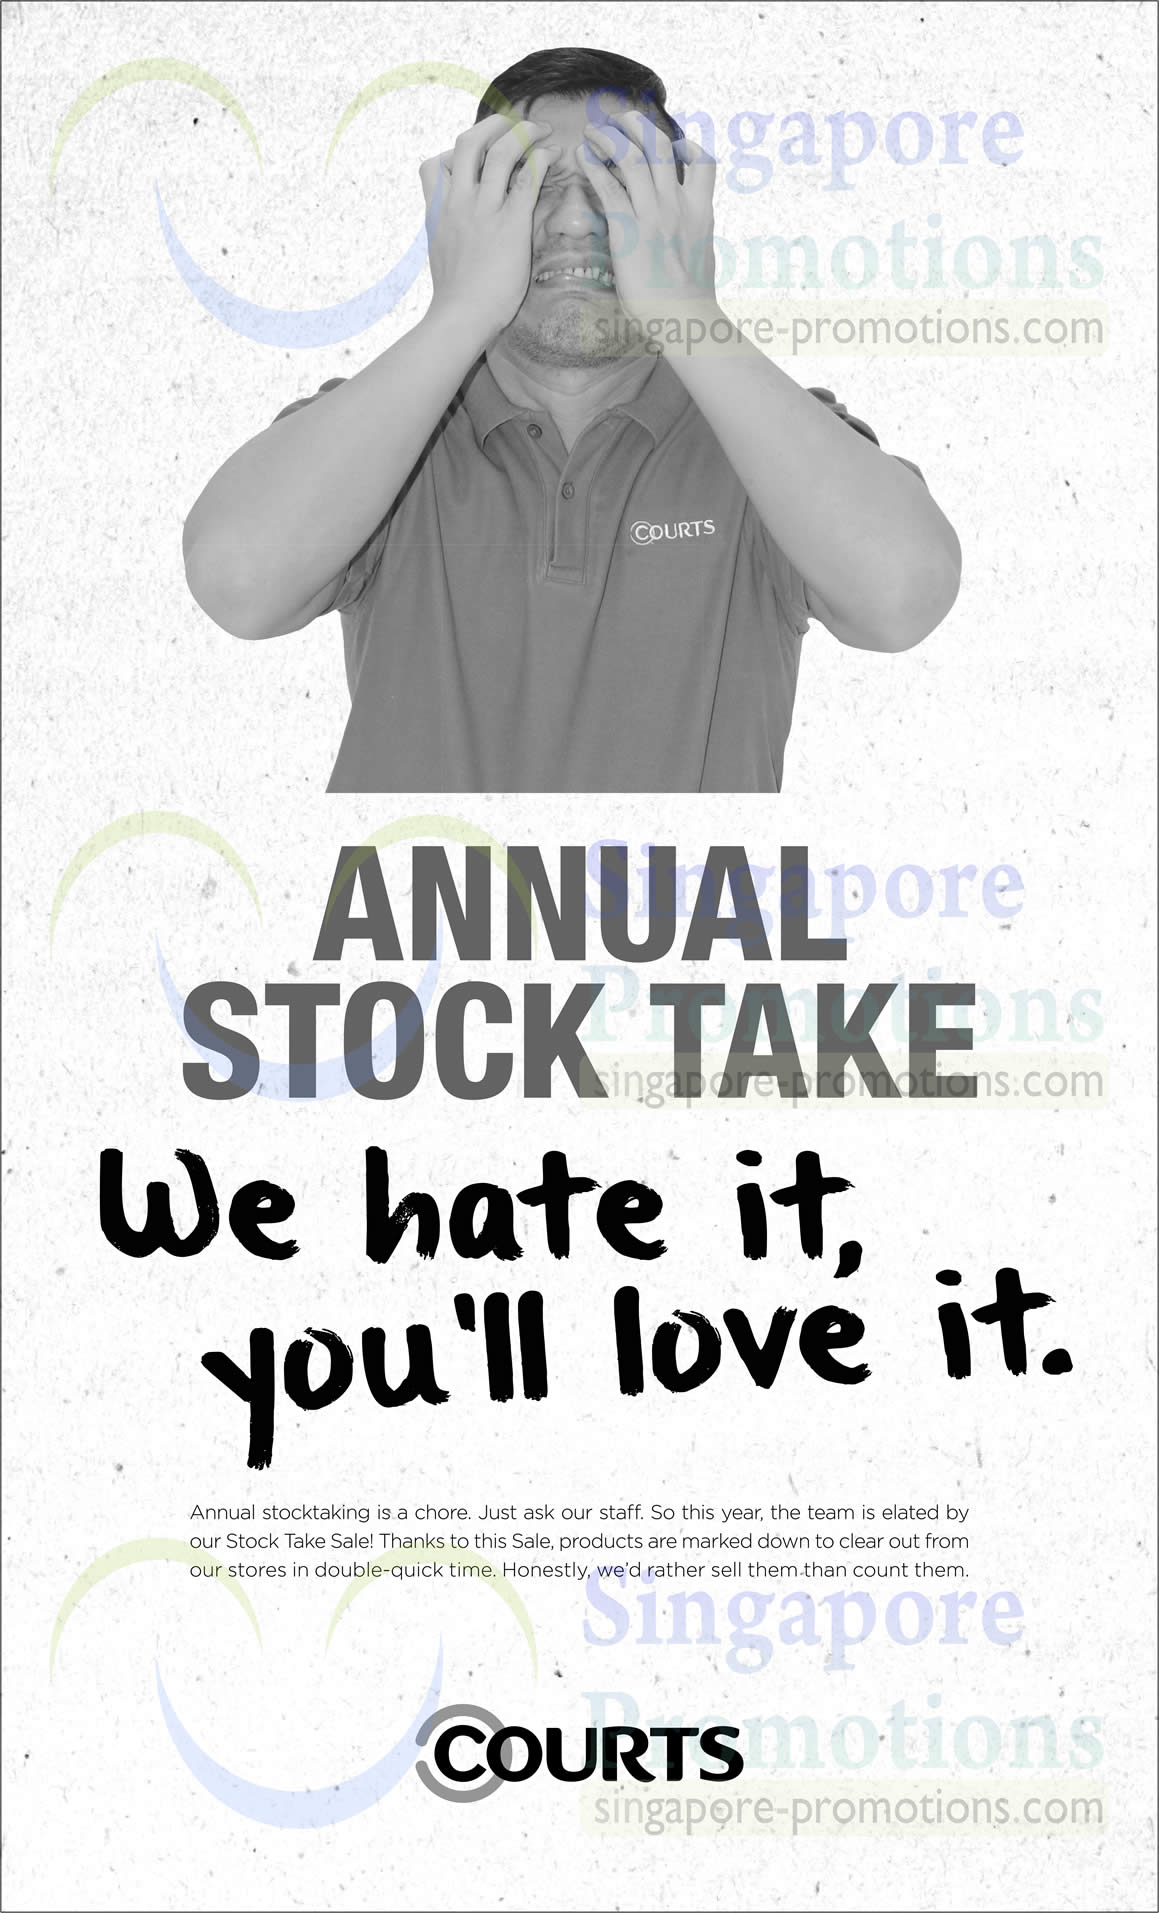 Featured image for Courts Annual Stock Take Offers 8 - 9 Mar 2014